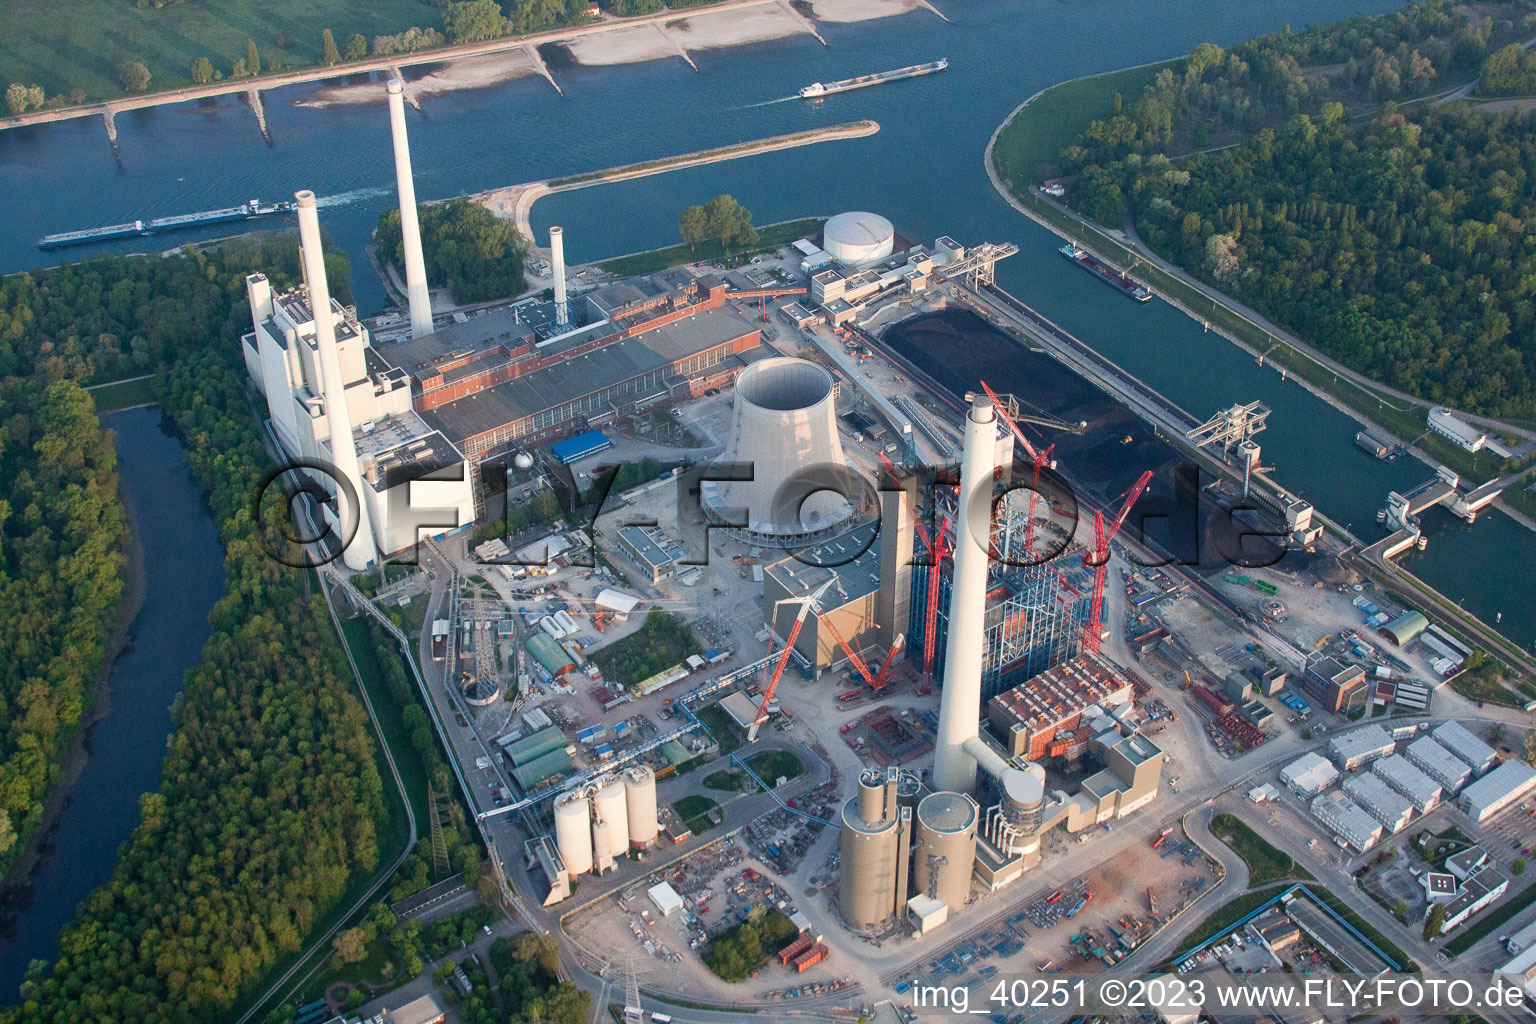 Aerial view of ENBW construction site in the district Rheinhafen in Karlsruhe in the state Baden-Wuerttemberg, Germany